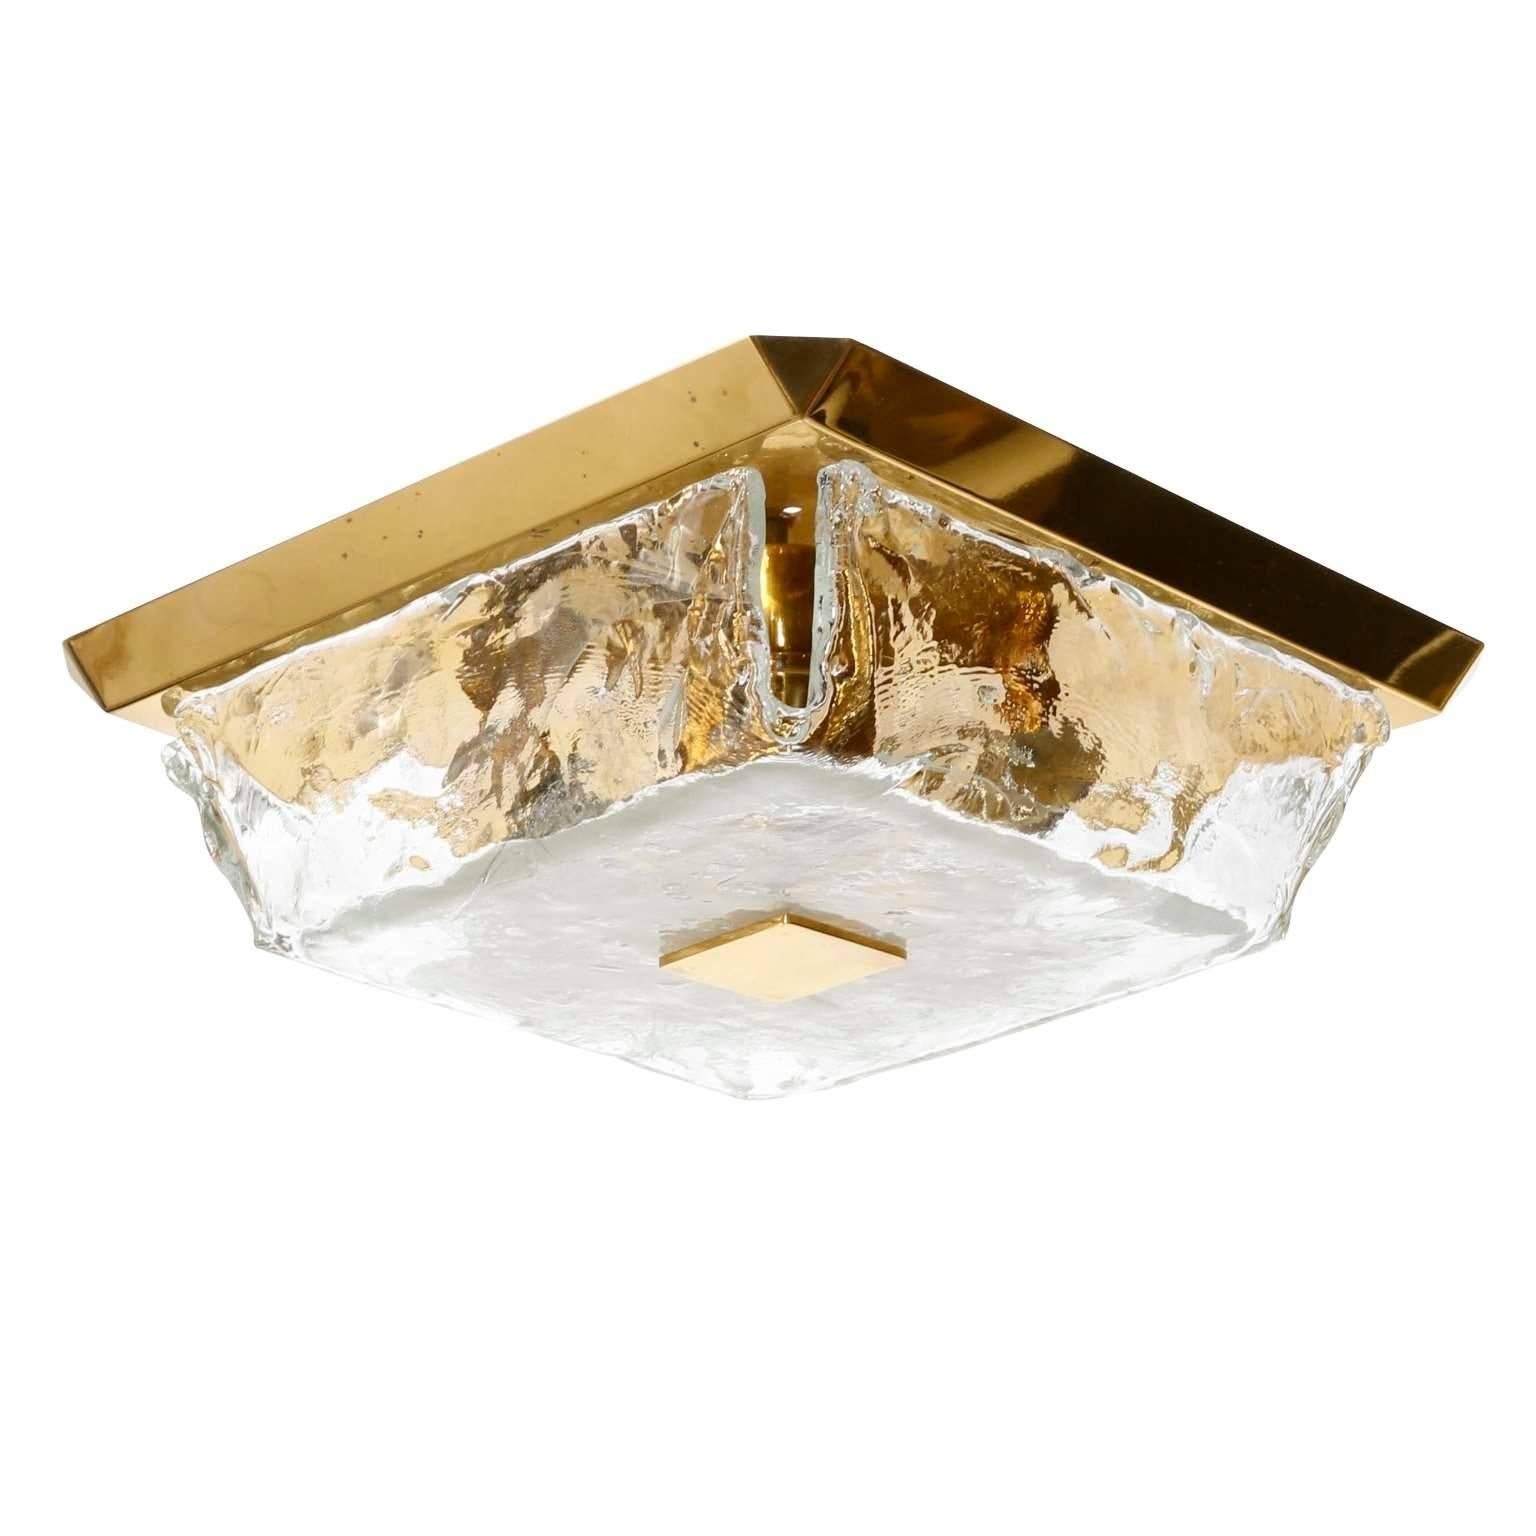 A square ceiling or wall lamp by J.T. Kalmar, Austria, manufactured in midcentury, circa 1970 (late 1960s or early 1970s).
It is made of a polished brass backplate which holds a Murano glass lampshade with a square brass bolt.
The light has two